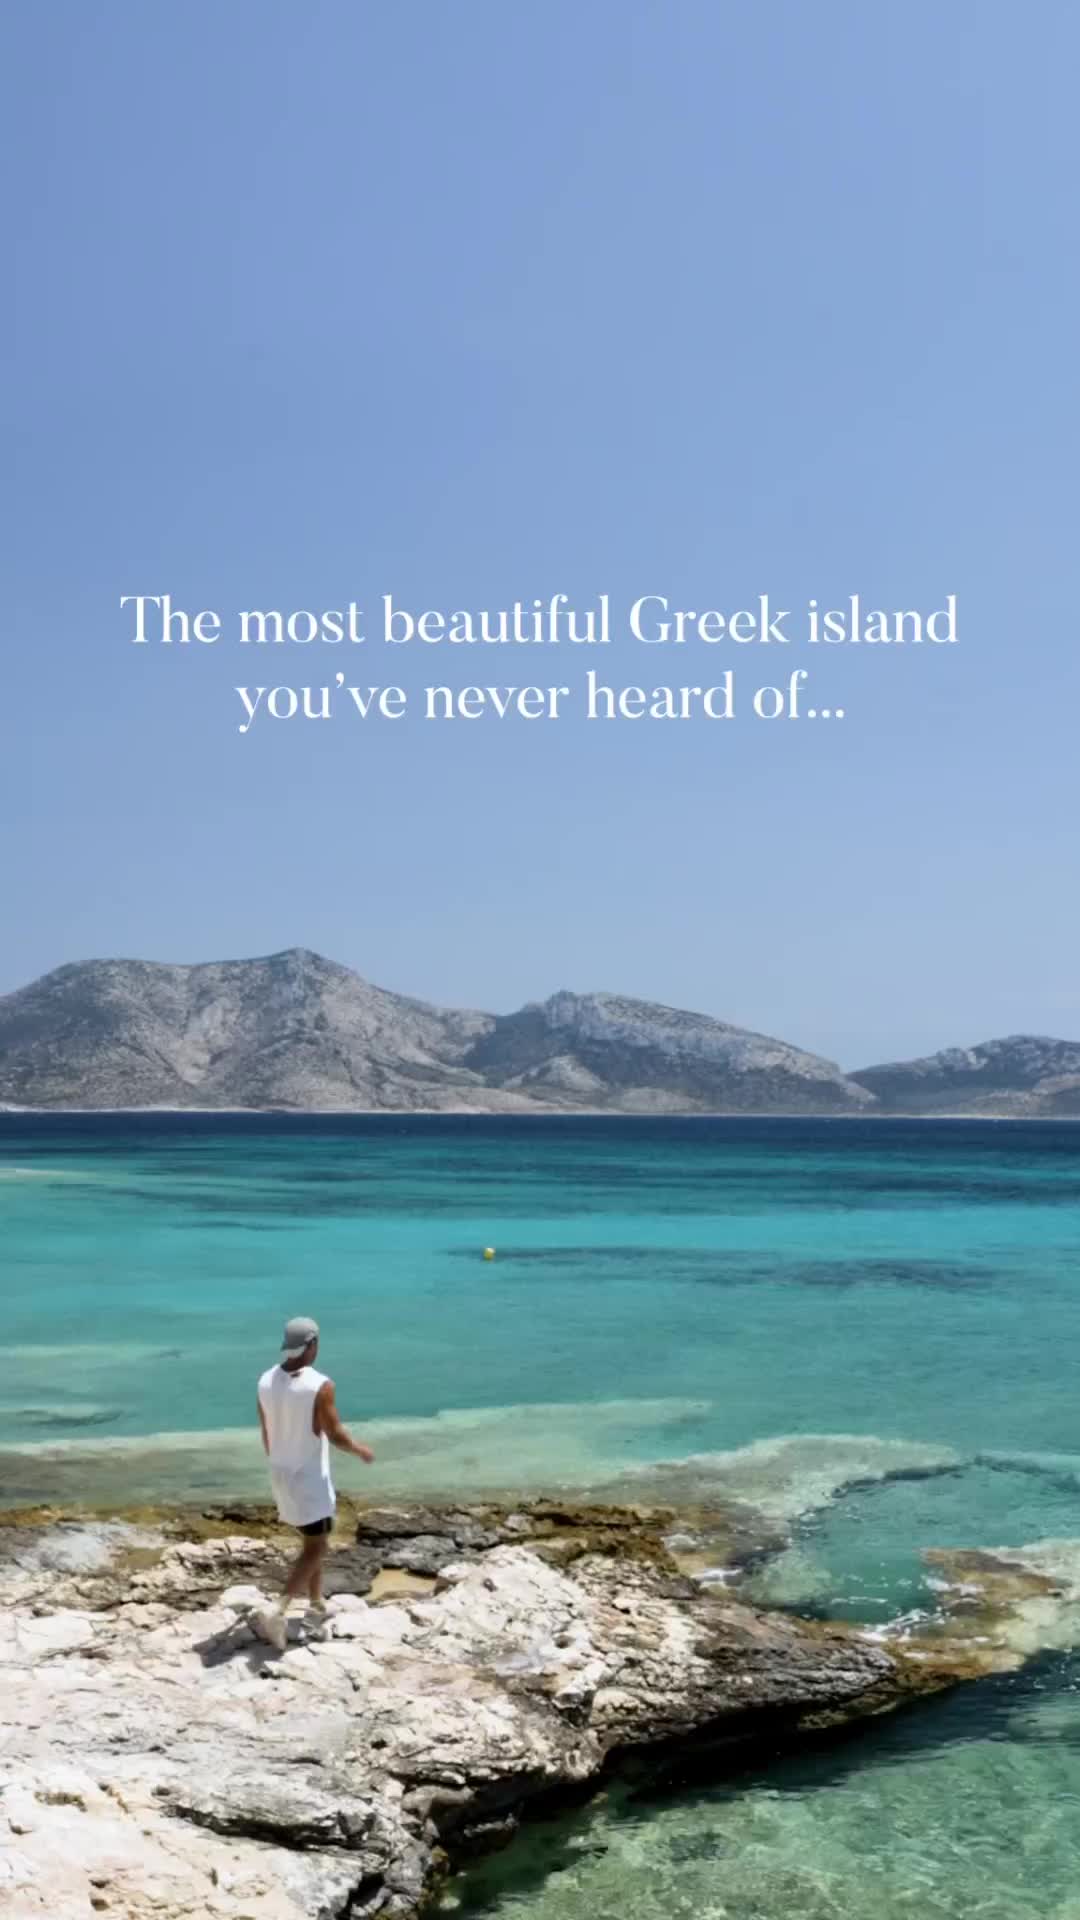 🇬🇷 This Greek island blew me away 🤯

Seriously, I was only meant to do a day trip from Naxos to visit Koufonisia but the moment the boat reached the port I was besotted with the small Cycladic island’s electric blue water and cute town, so insisted on staying overnight to explore more of it. 

I told the tour boat I wouldn’t be joining them on the way home to Naxos and they completely understood. Best decision ever because Koufonisi, although small, had some of the best beaches and clearest water I’ve ever seen in Greece (and the world). 

There are day trips from Mykonos, Paros and Naxos but if you have time I definitely recommend taking the ferry and staying overnight. You won’t regret it!

📍 Koufonisi (Kato), Cyclades, Greece 🇬🇷

~

#greece #greekislands #cyclades #koufonisia #koufonisi #smallcyclades #greecetravel